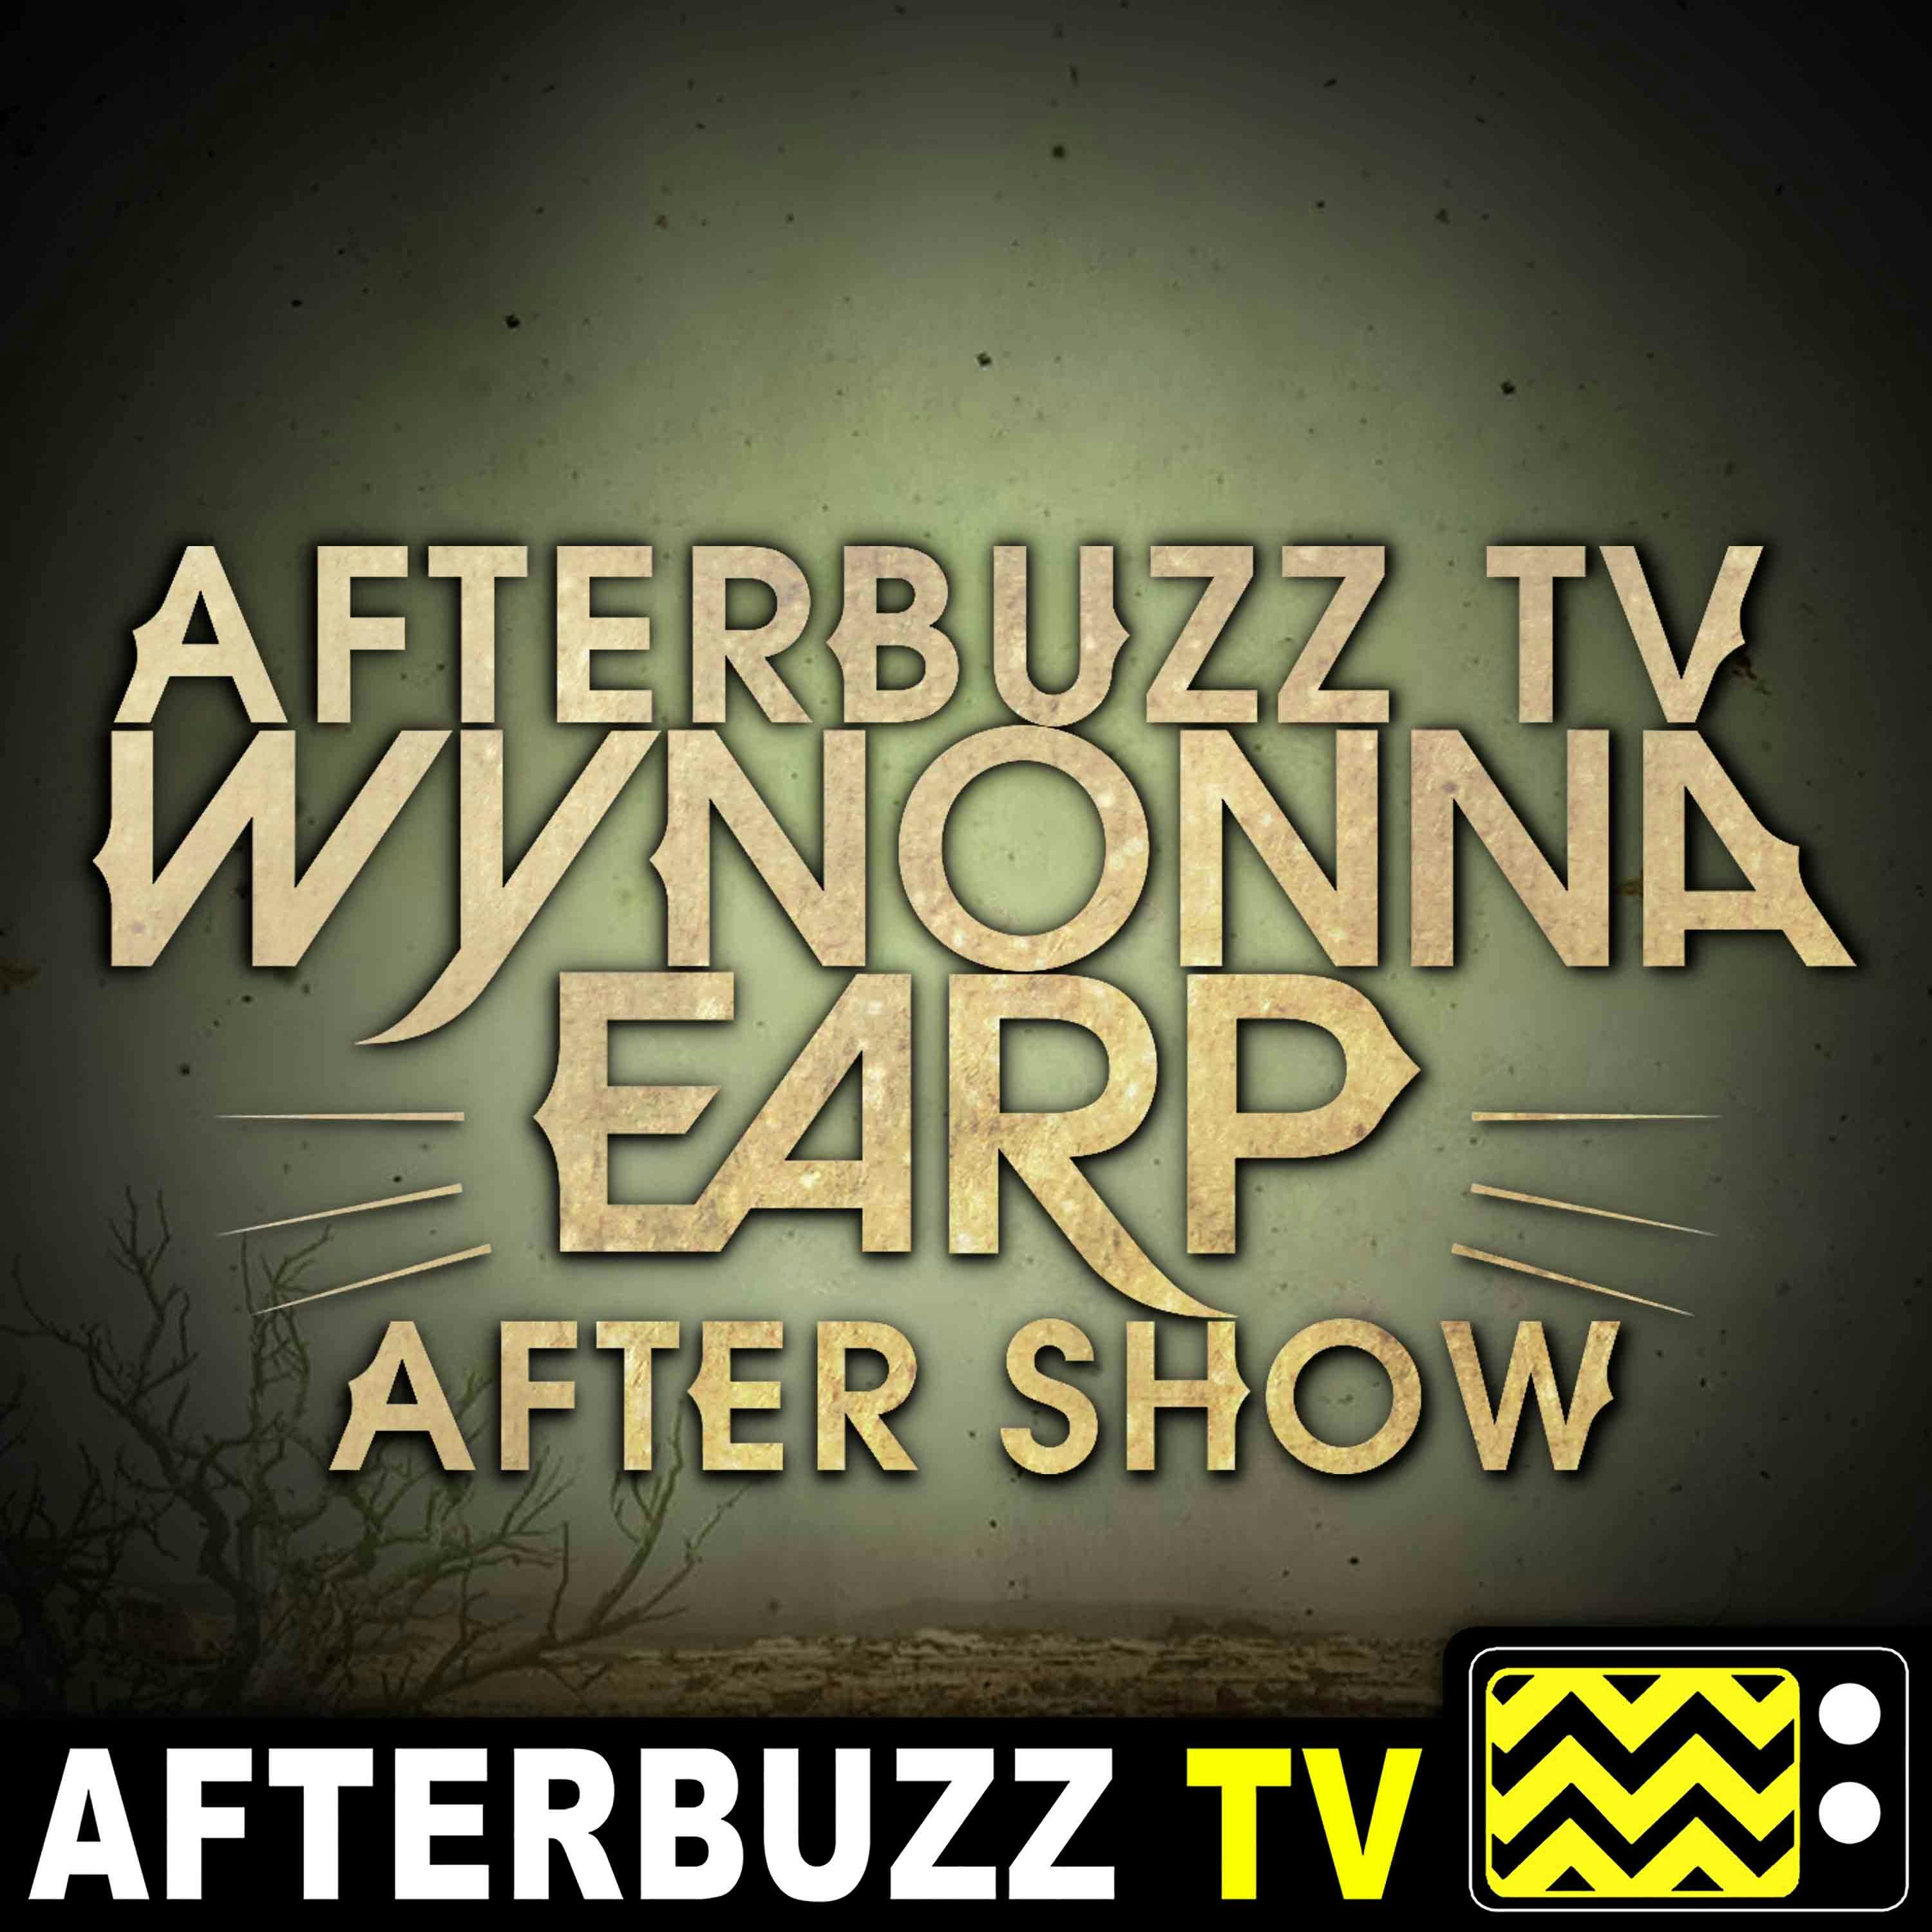 Wynonna Earp S:1 | Purgatory; Keep the Home Fires Burning E:1 & E:2 | AfterBuzz TV AfterShow